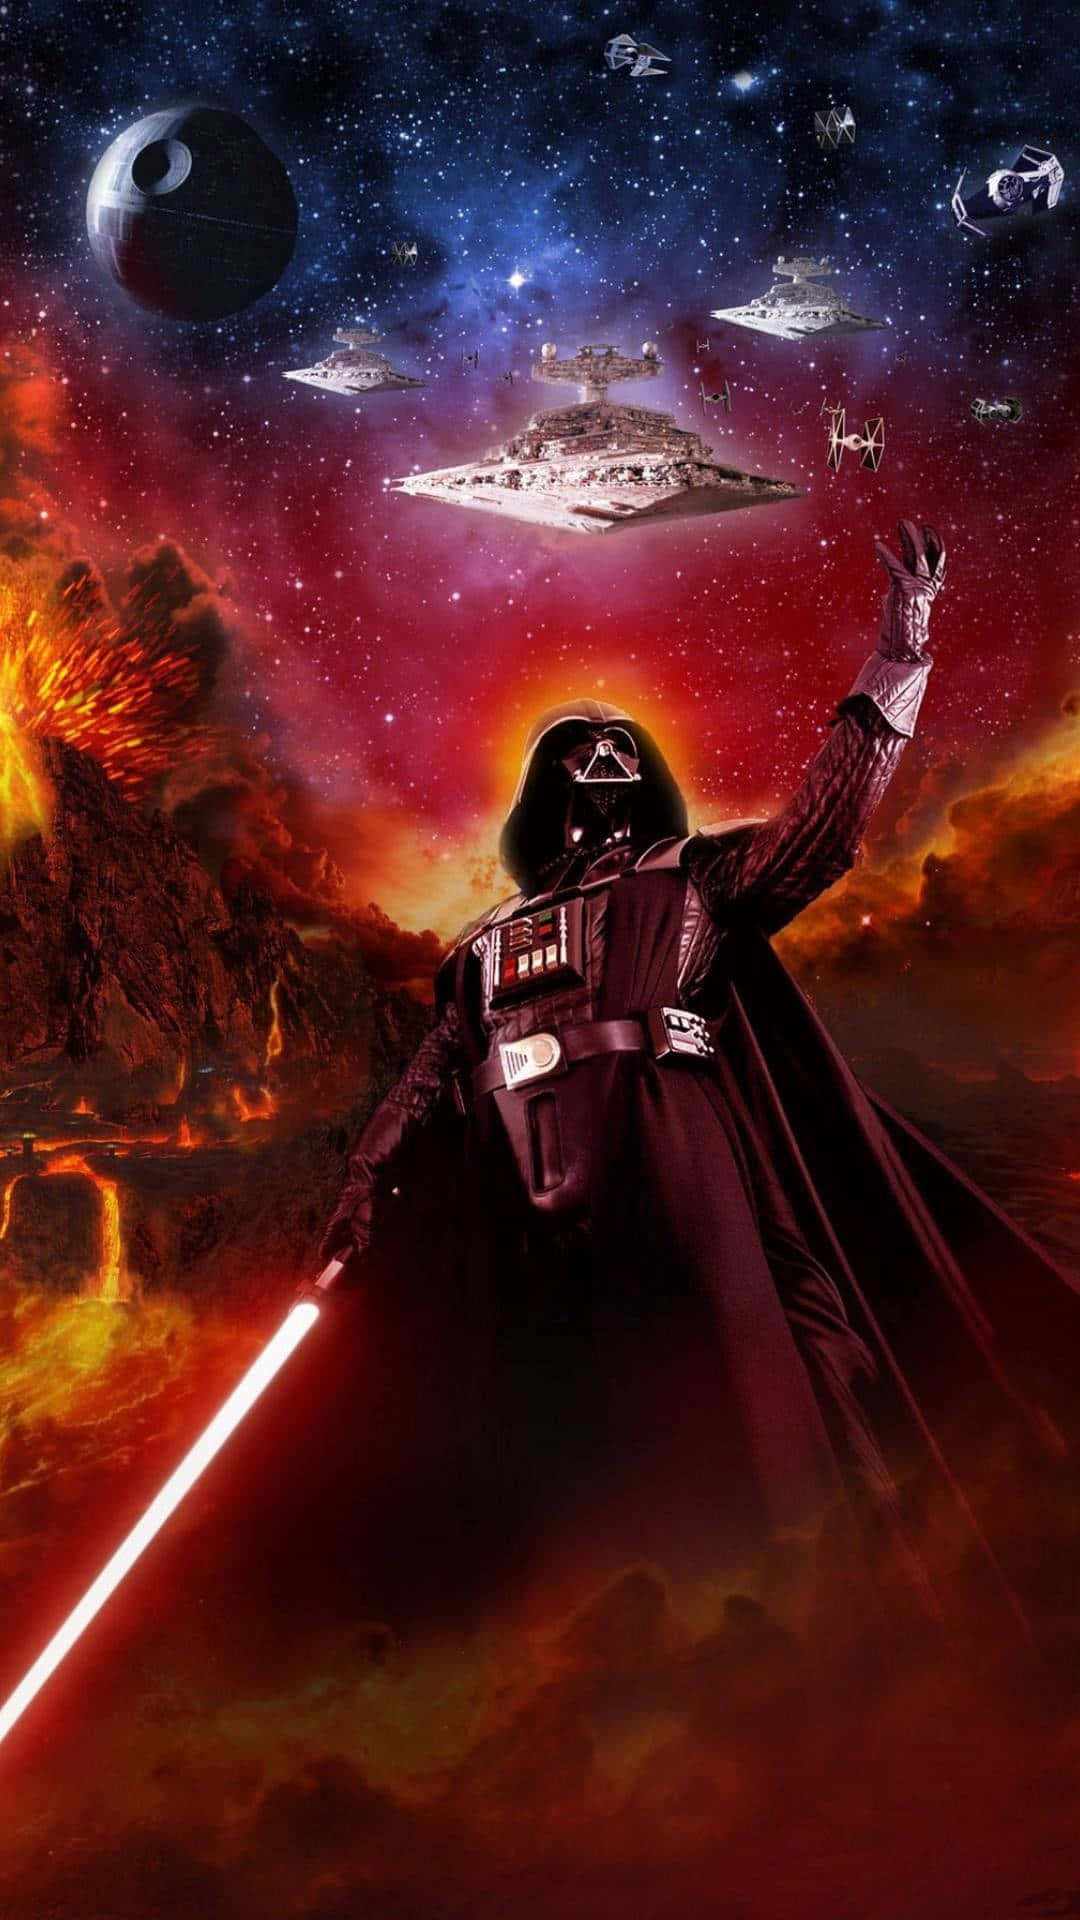 Darth Vader, Iconic Villain of the Galactic Empire